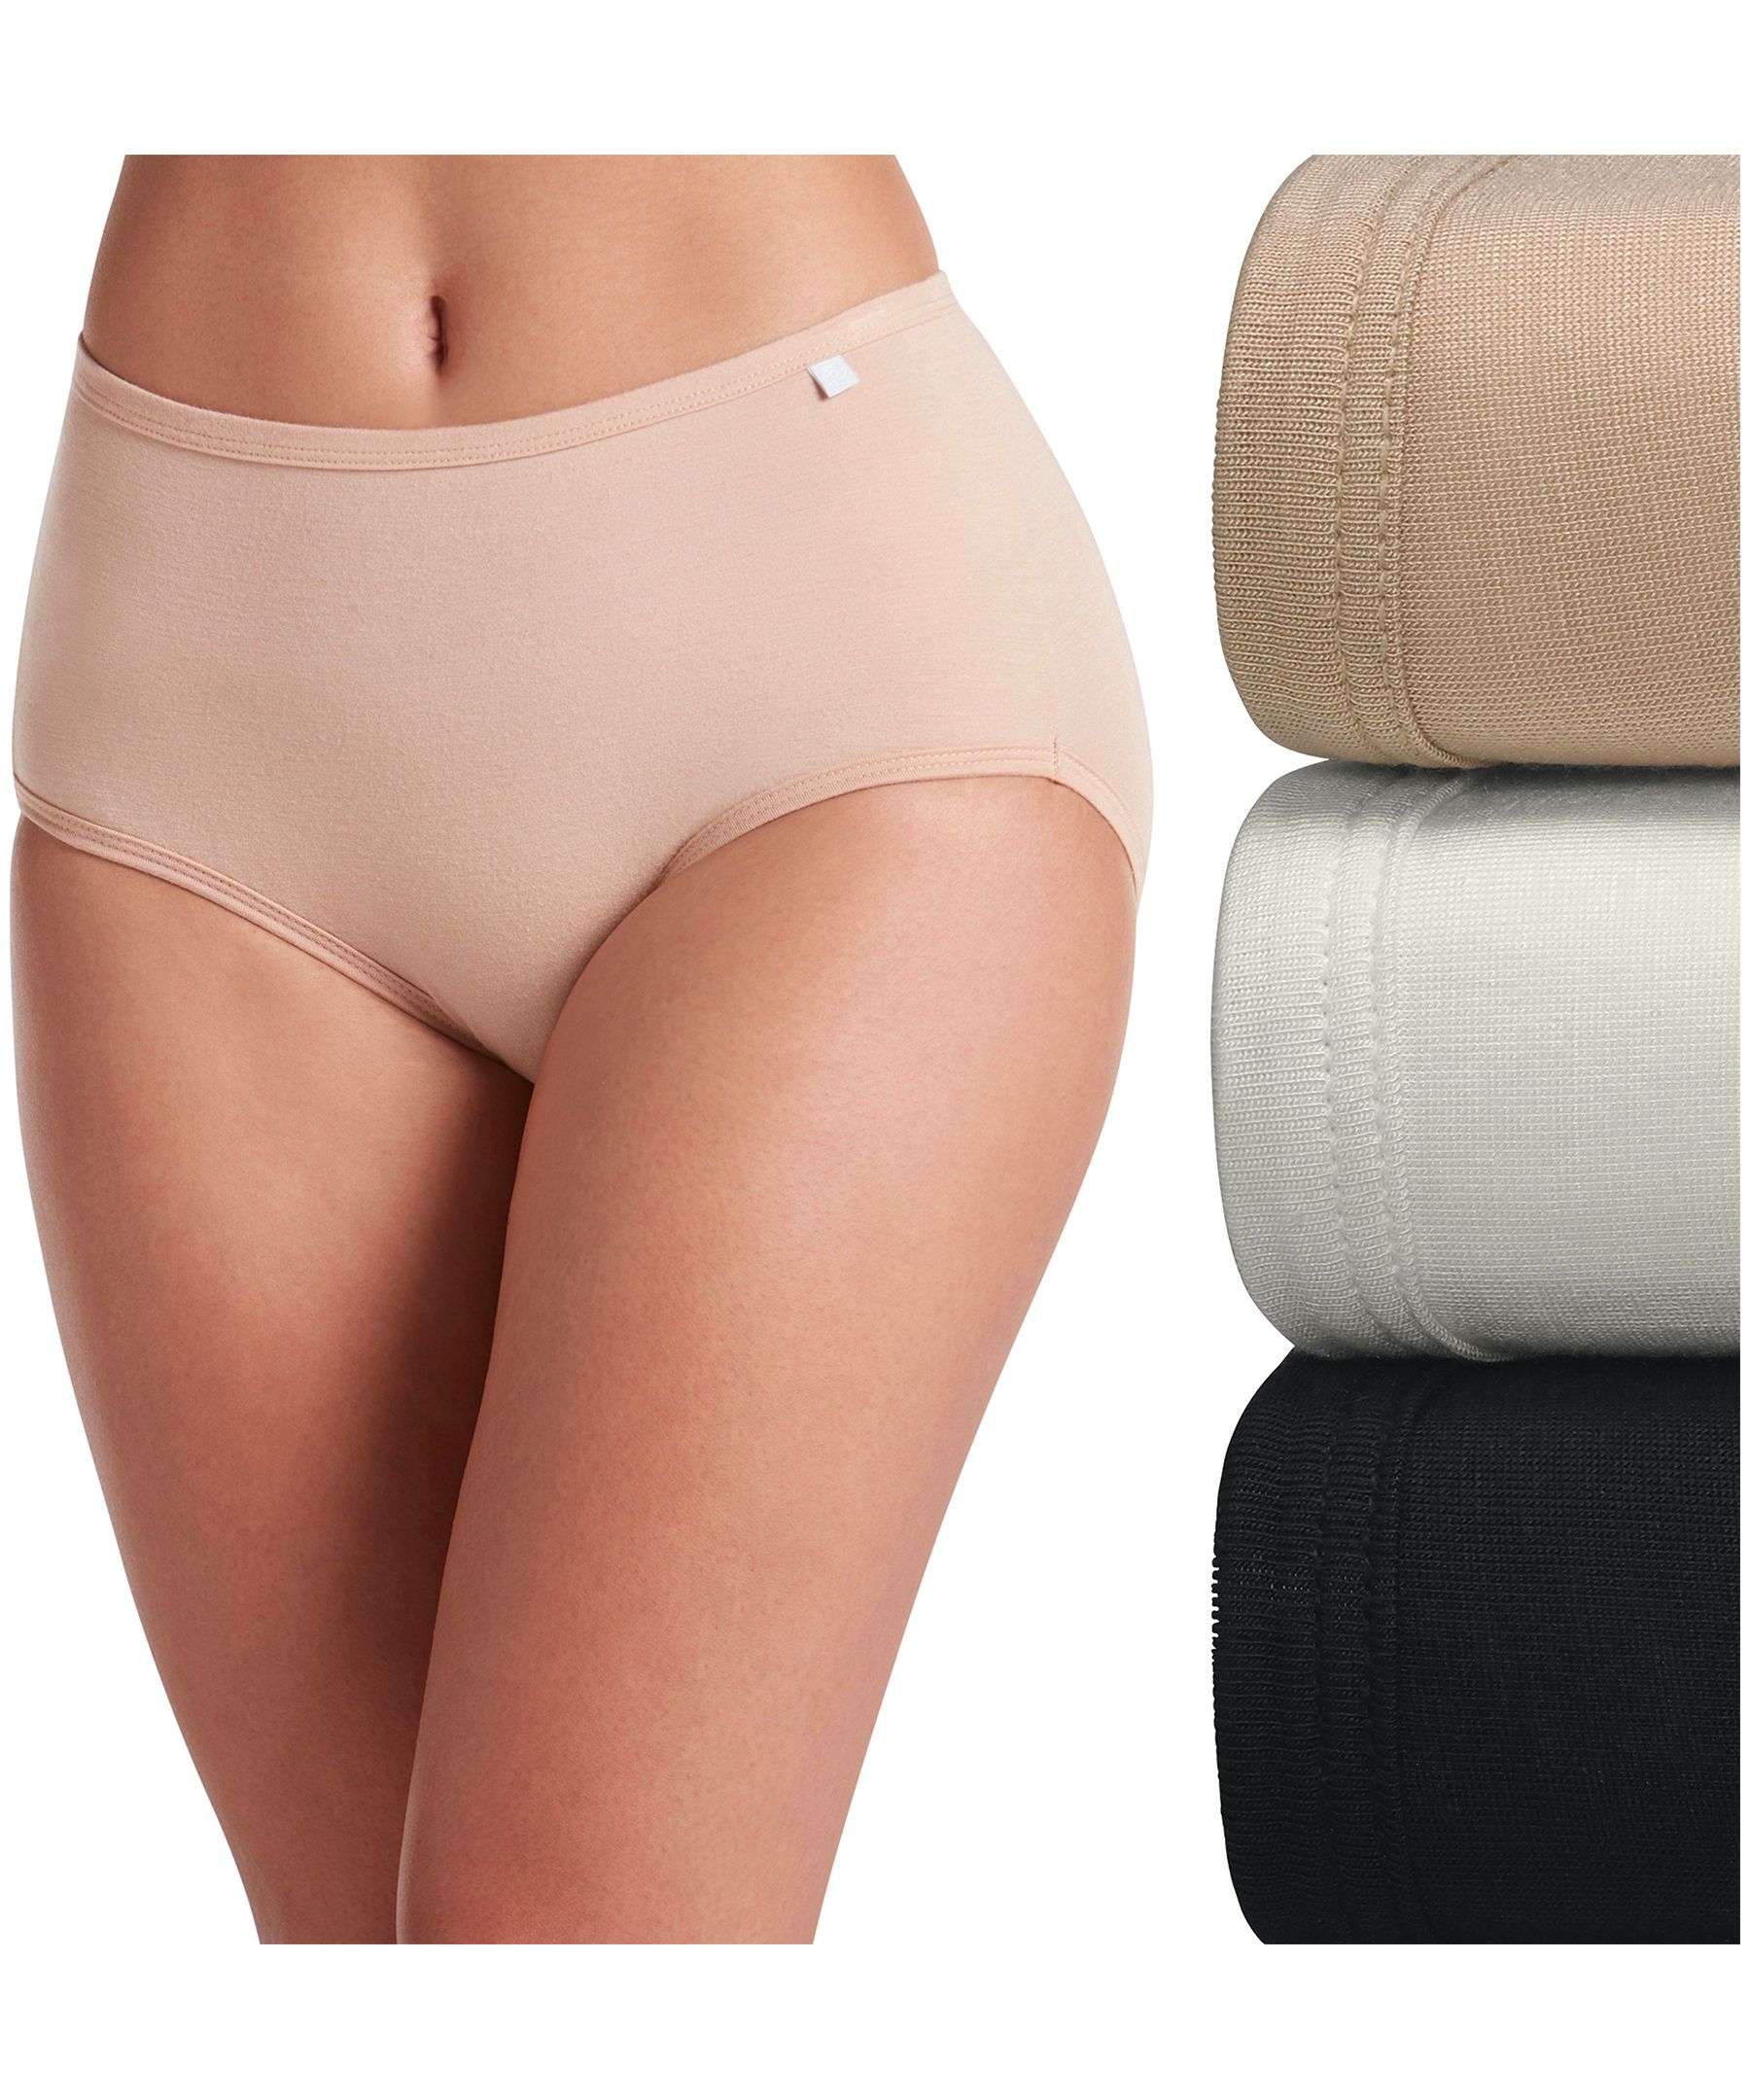 https://media-www.marks.com/product/ladies-accessories/ladies-lingerie/briefs/410014212441/jockey-elance-supersoft-3pk-b-ivory-light-black-6--4e8efac2-4fc2-4740-9ce2-8e5efbae0914-jpgrendition.jpg?imdensity=1&imwidth=1244&impolicy=mZoom